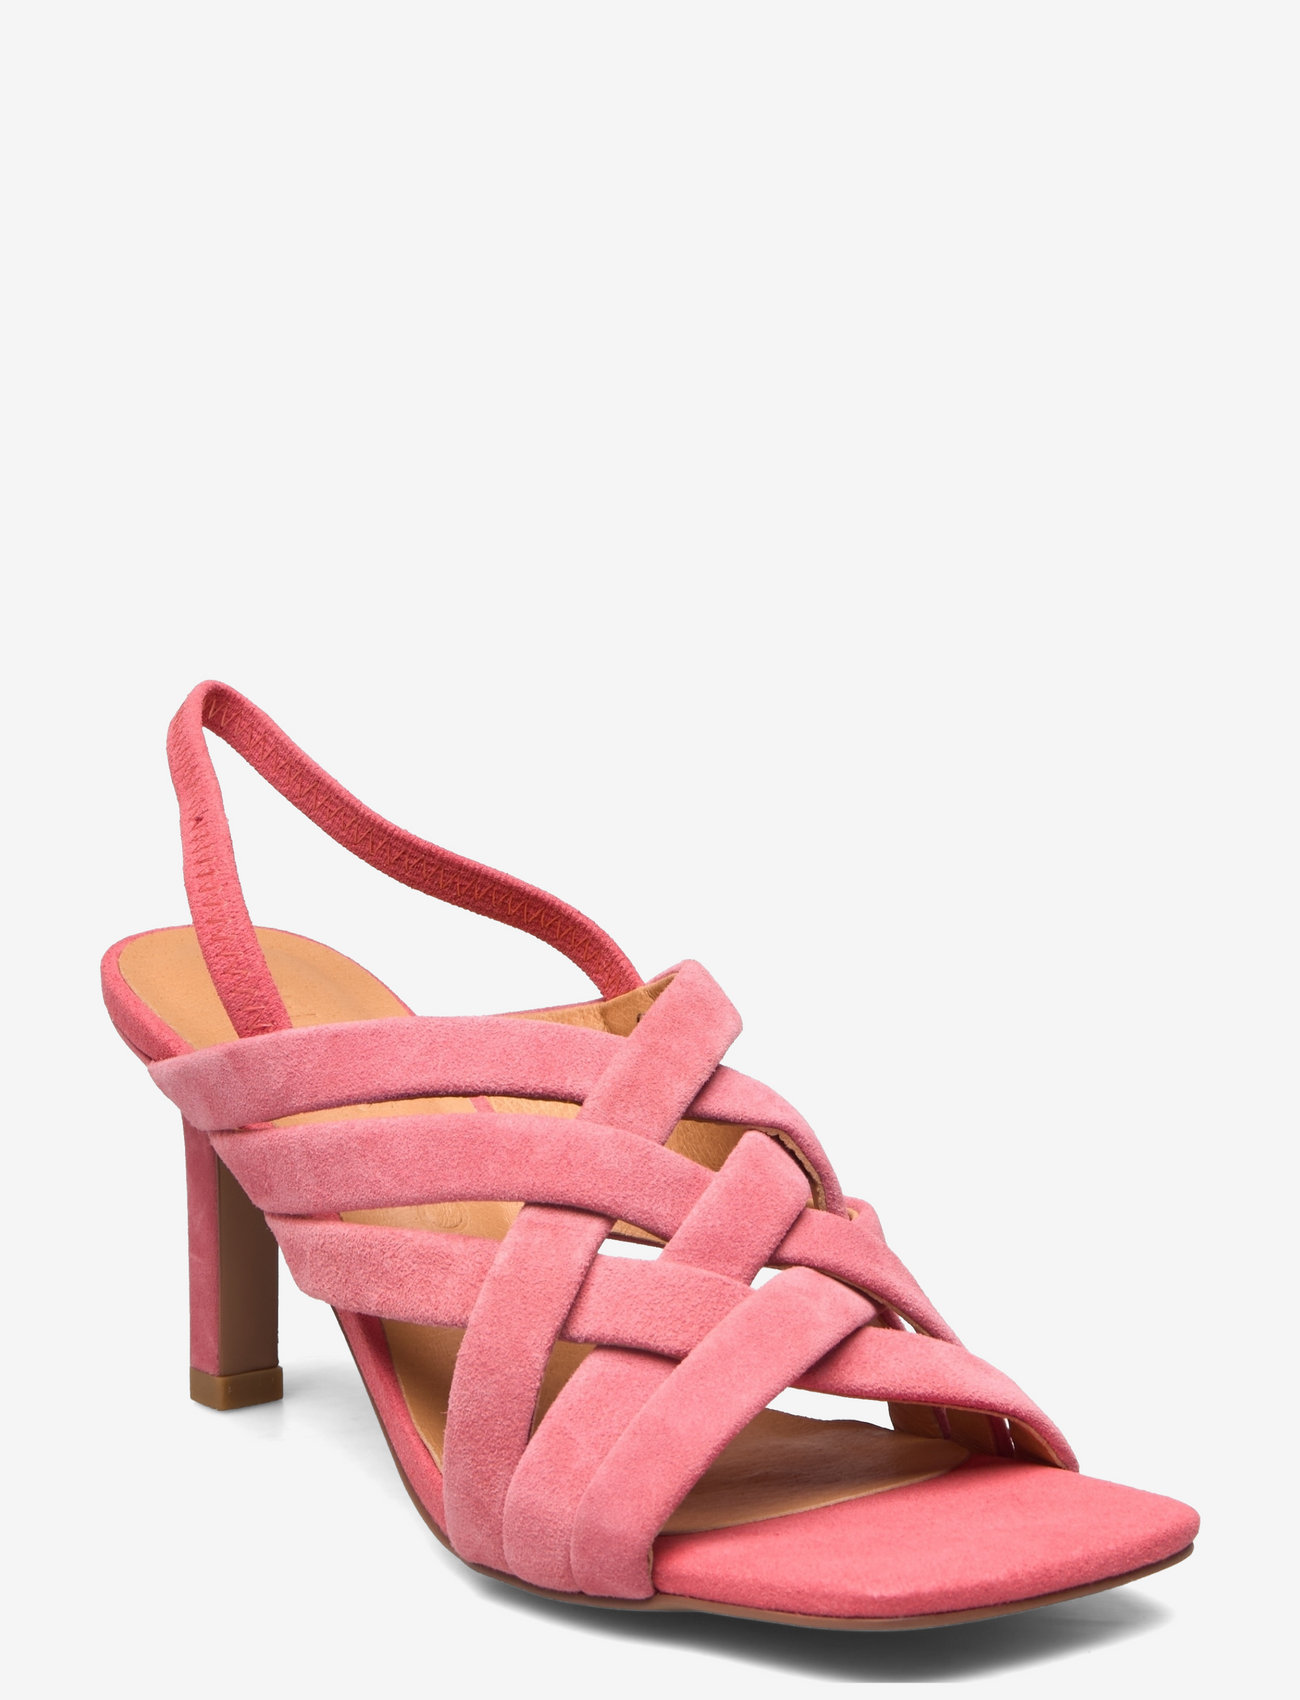 Sofie Schnoor - Stiletto - party wear at outlet prices - bright pink - 0